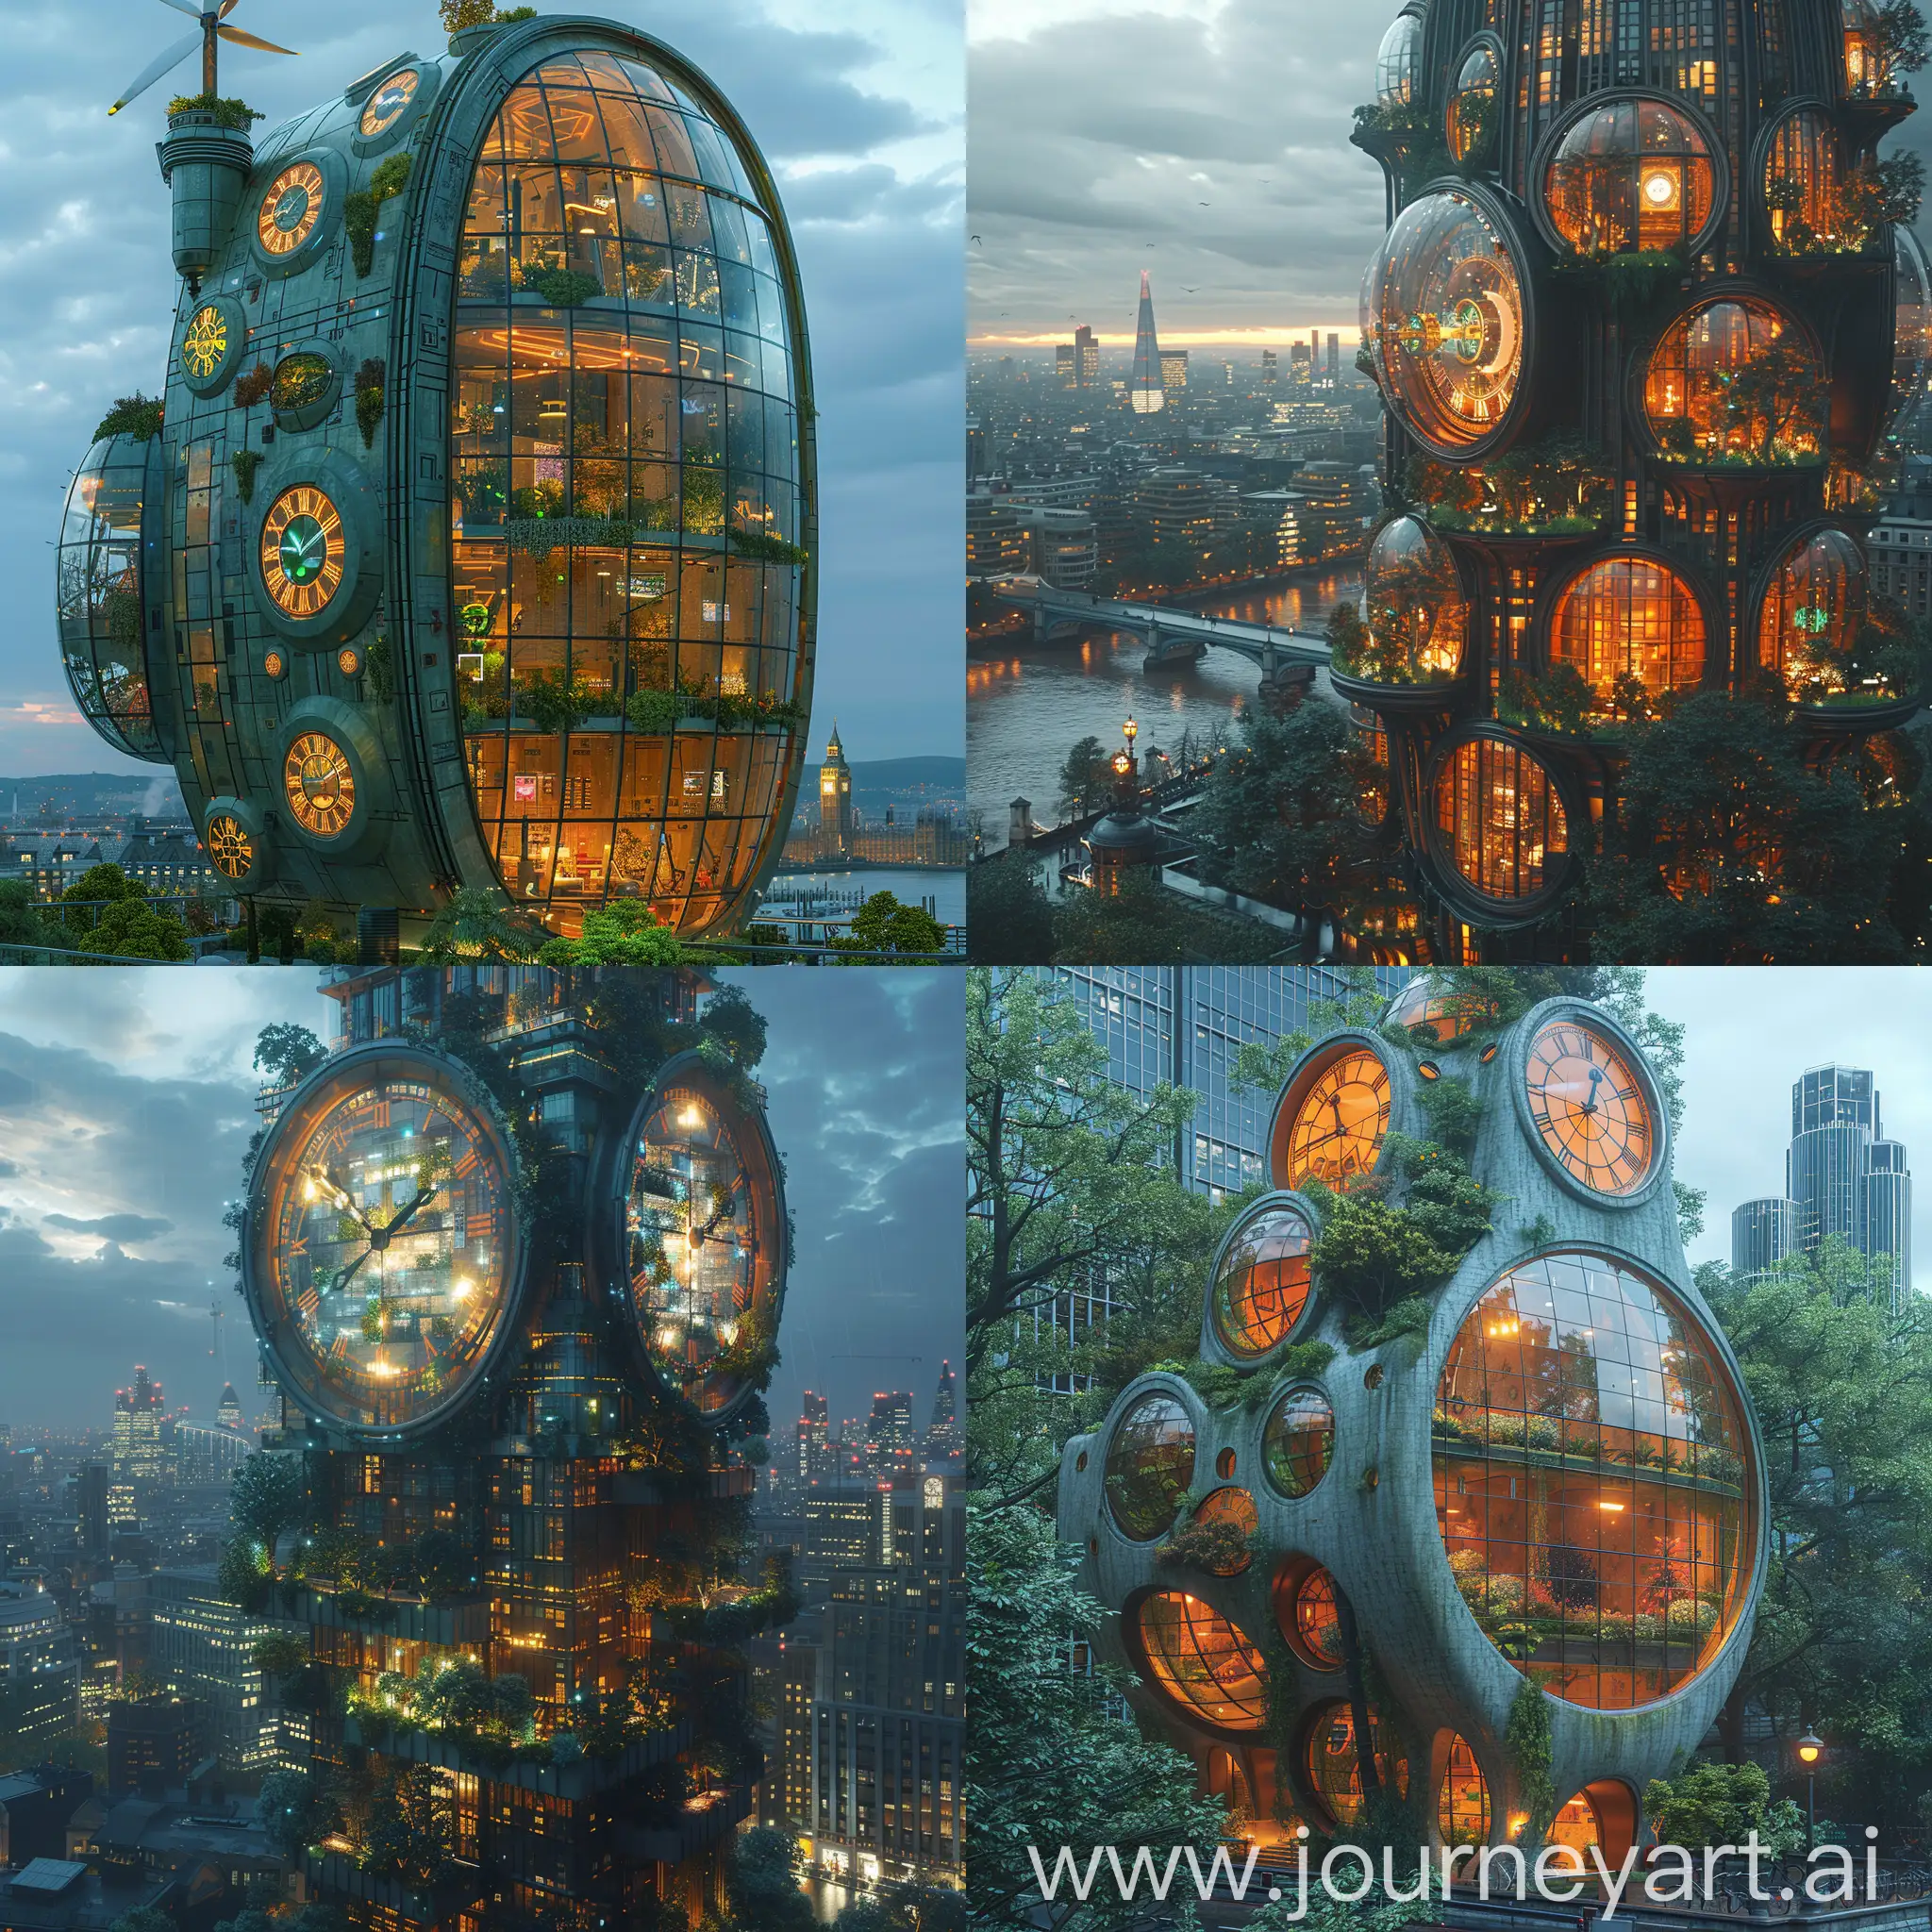 Futuristic Big Ben, Interactive LED Lighting, Augmented Reality Displays, Vertical Gardens, Sky Lounge, Self-Cleaning Surfaces, Solar Panels, Wind Turbines, Automated Maintenance Drones, Weather Adaptive Design, Holographic Clock Face. Rainwater Harvesting System, Green Roof, Energy-Efficient Lighting, Recycled Materials, Low-Energy Elevators, Natural Ventilation System, Bicycle Parking, Vertical Axis Wind Turbines, Sustainable Building Materials, Green Technology Showcase, Reinforced Structure, Shock-Absorbing Foundation, Flexible Building Materials, Anti-Blast Windows, Seismic Dampers, Fire-Resistant Coating, Impact-Resistant Glass, Emergency Escape Systems. Security Bollards, Anti-Corrosion Measures, octane render --stylize 1000